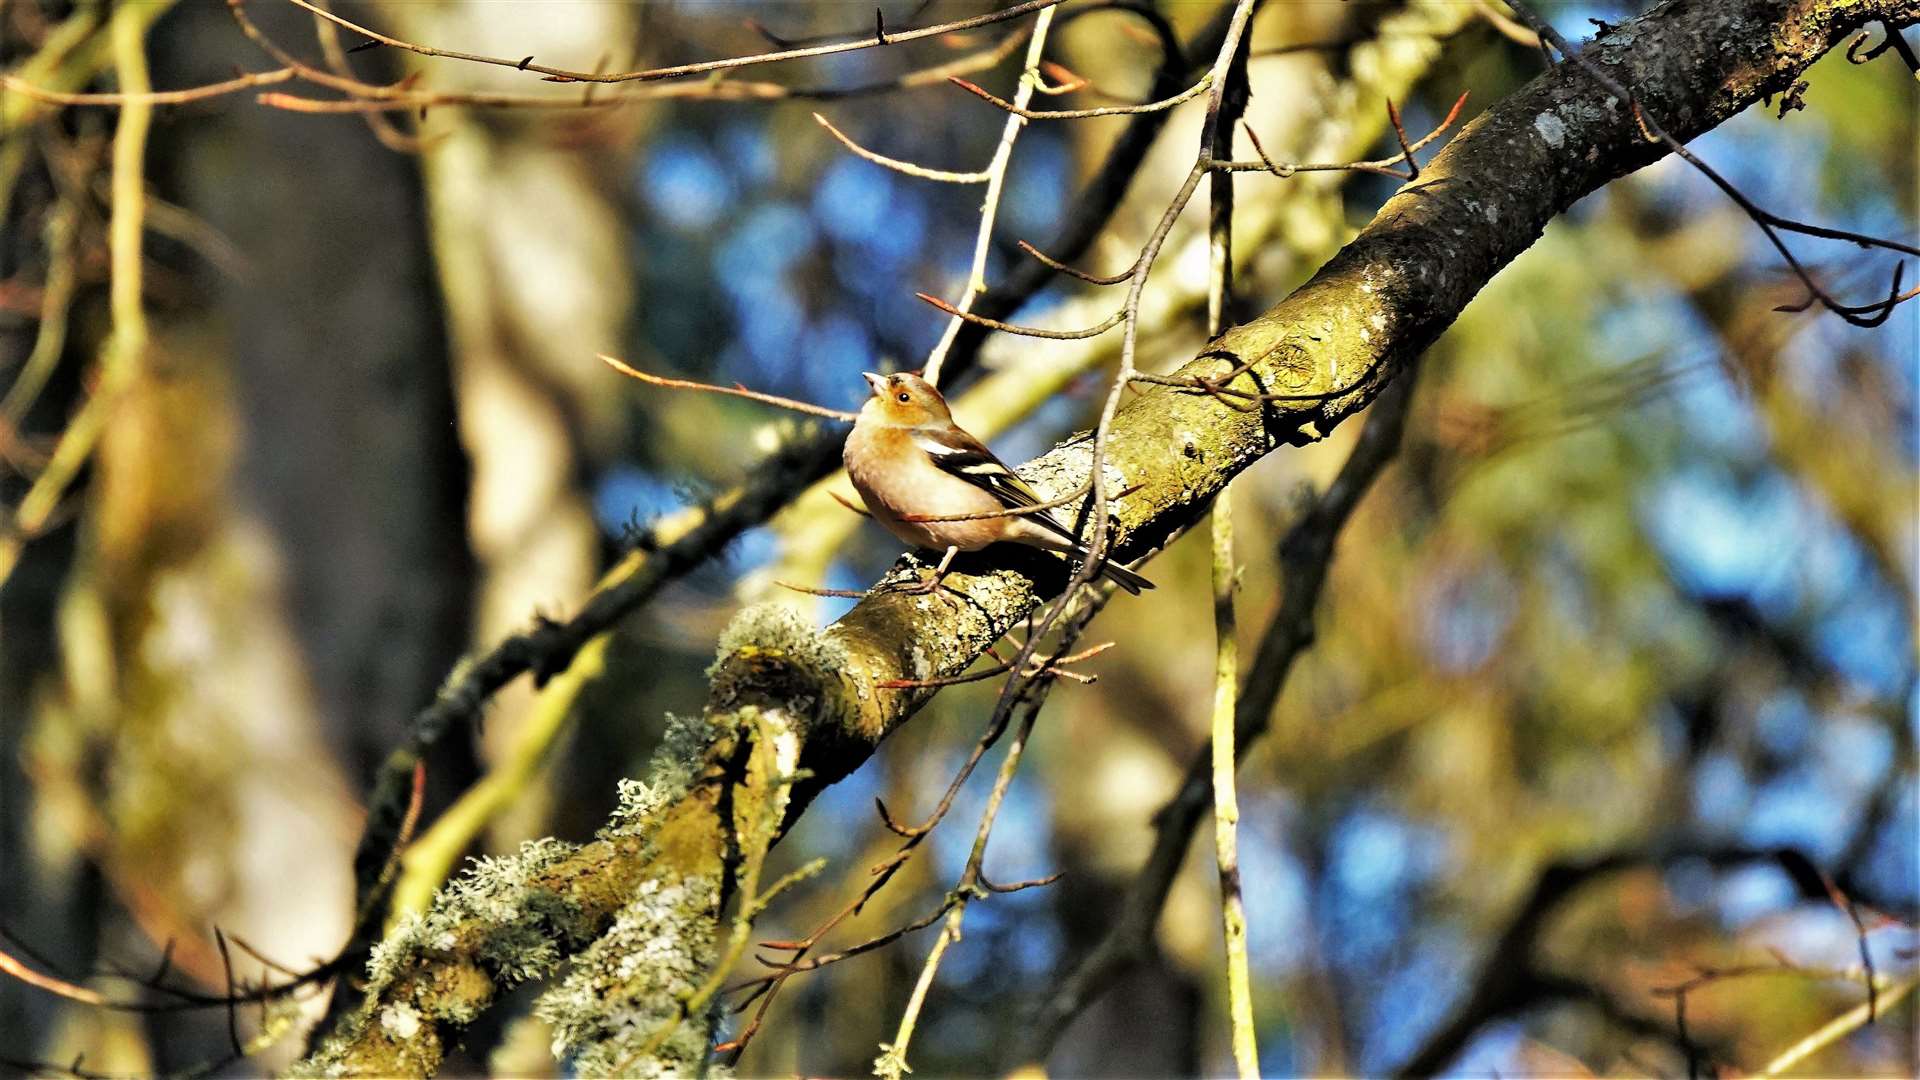 Chaffinch at Thrumster. Picture: DGS